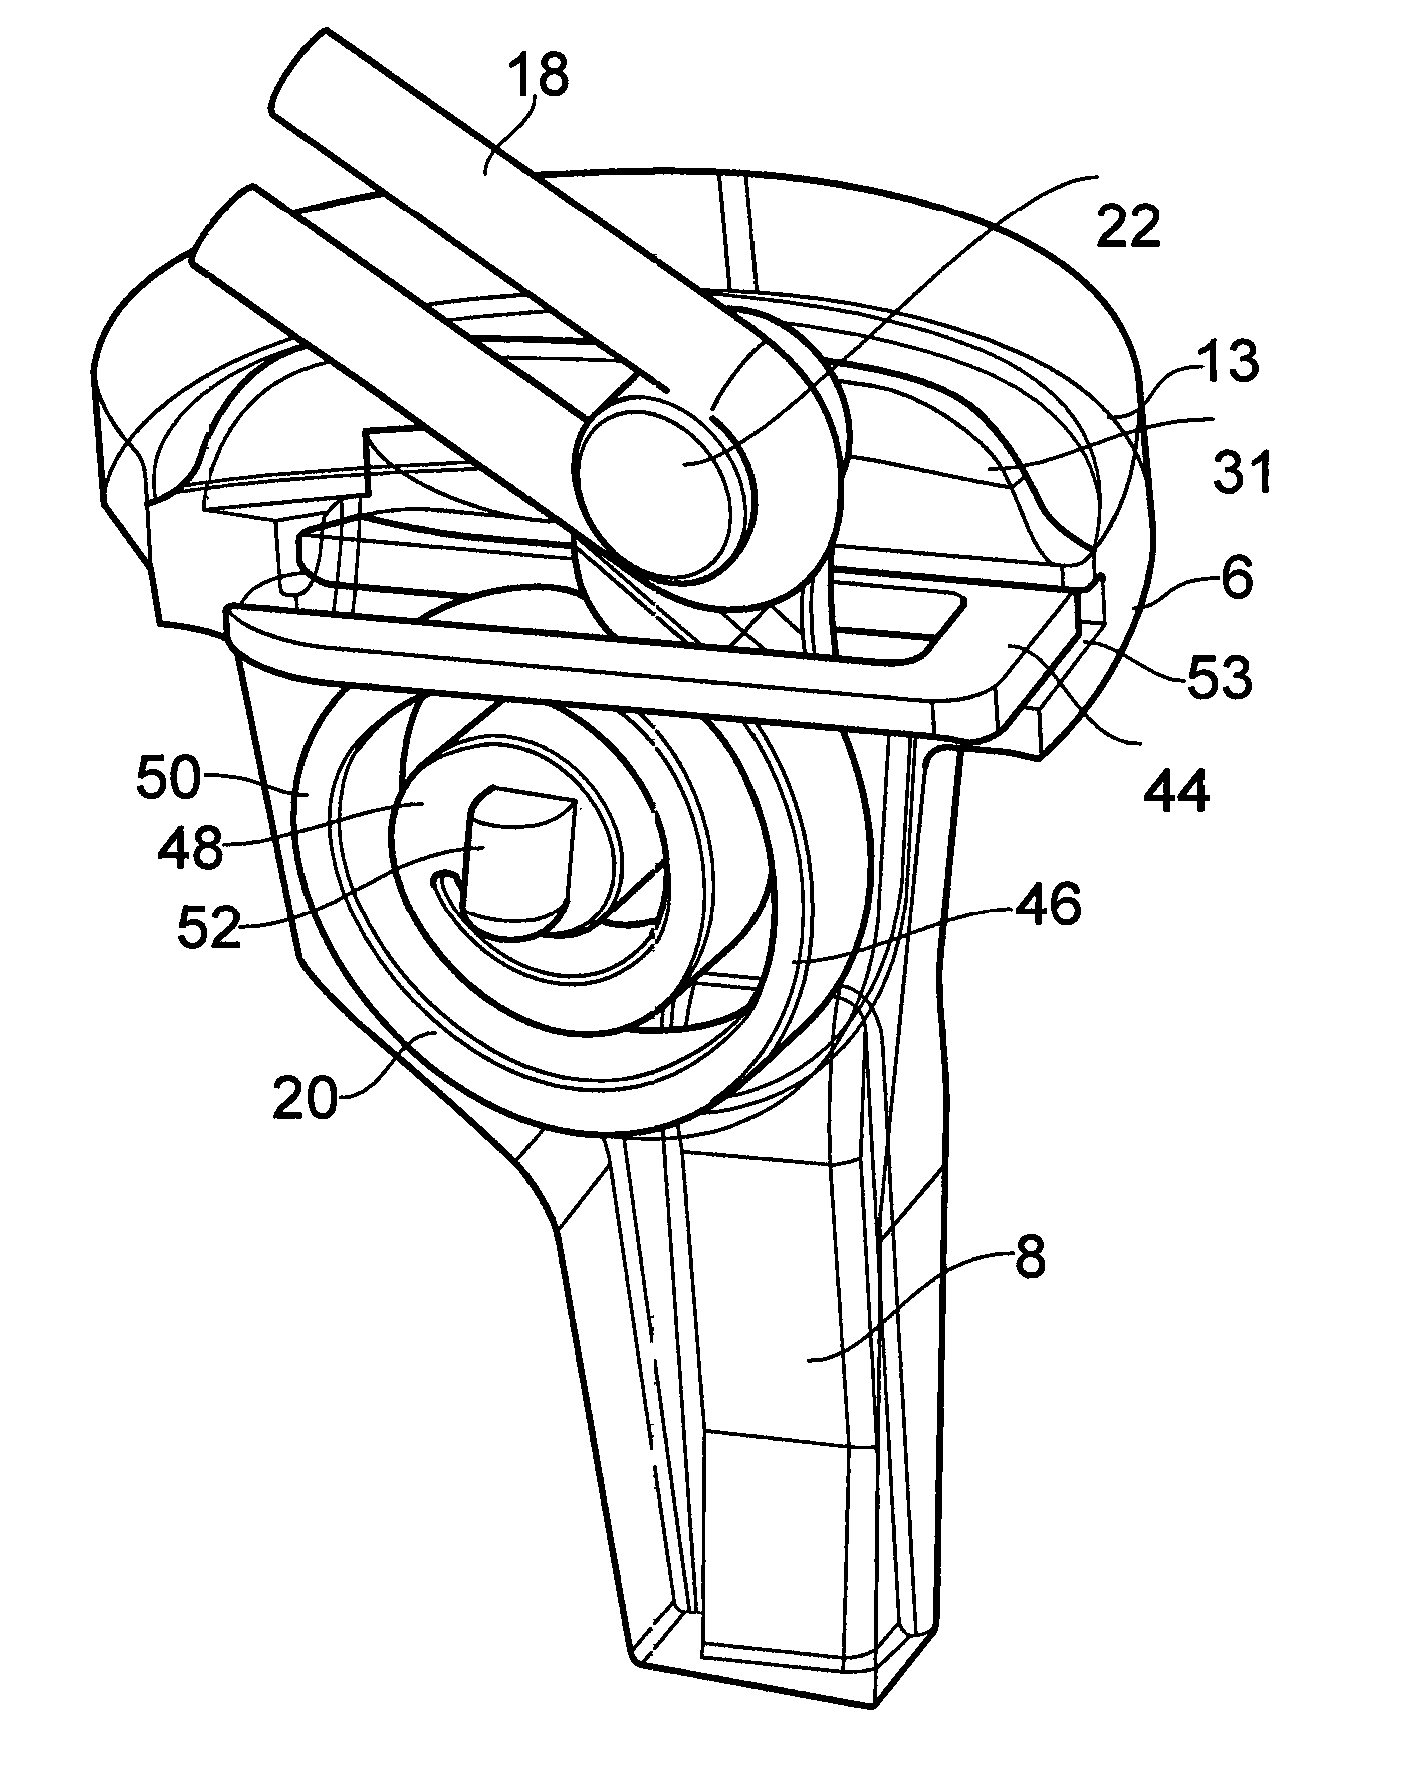 Ligament assembly